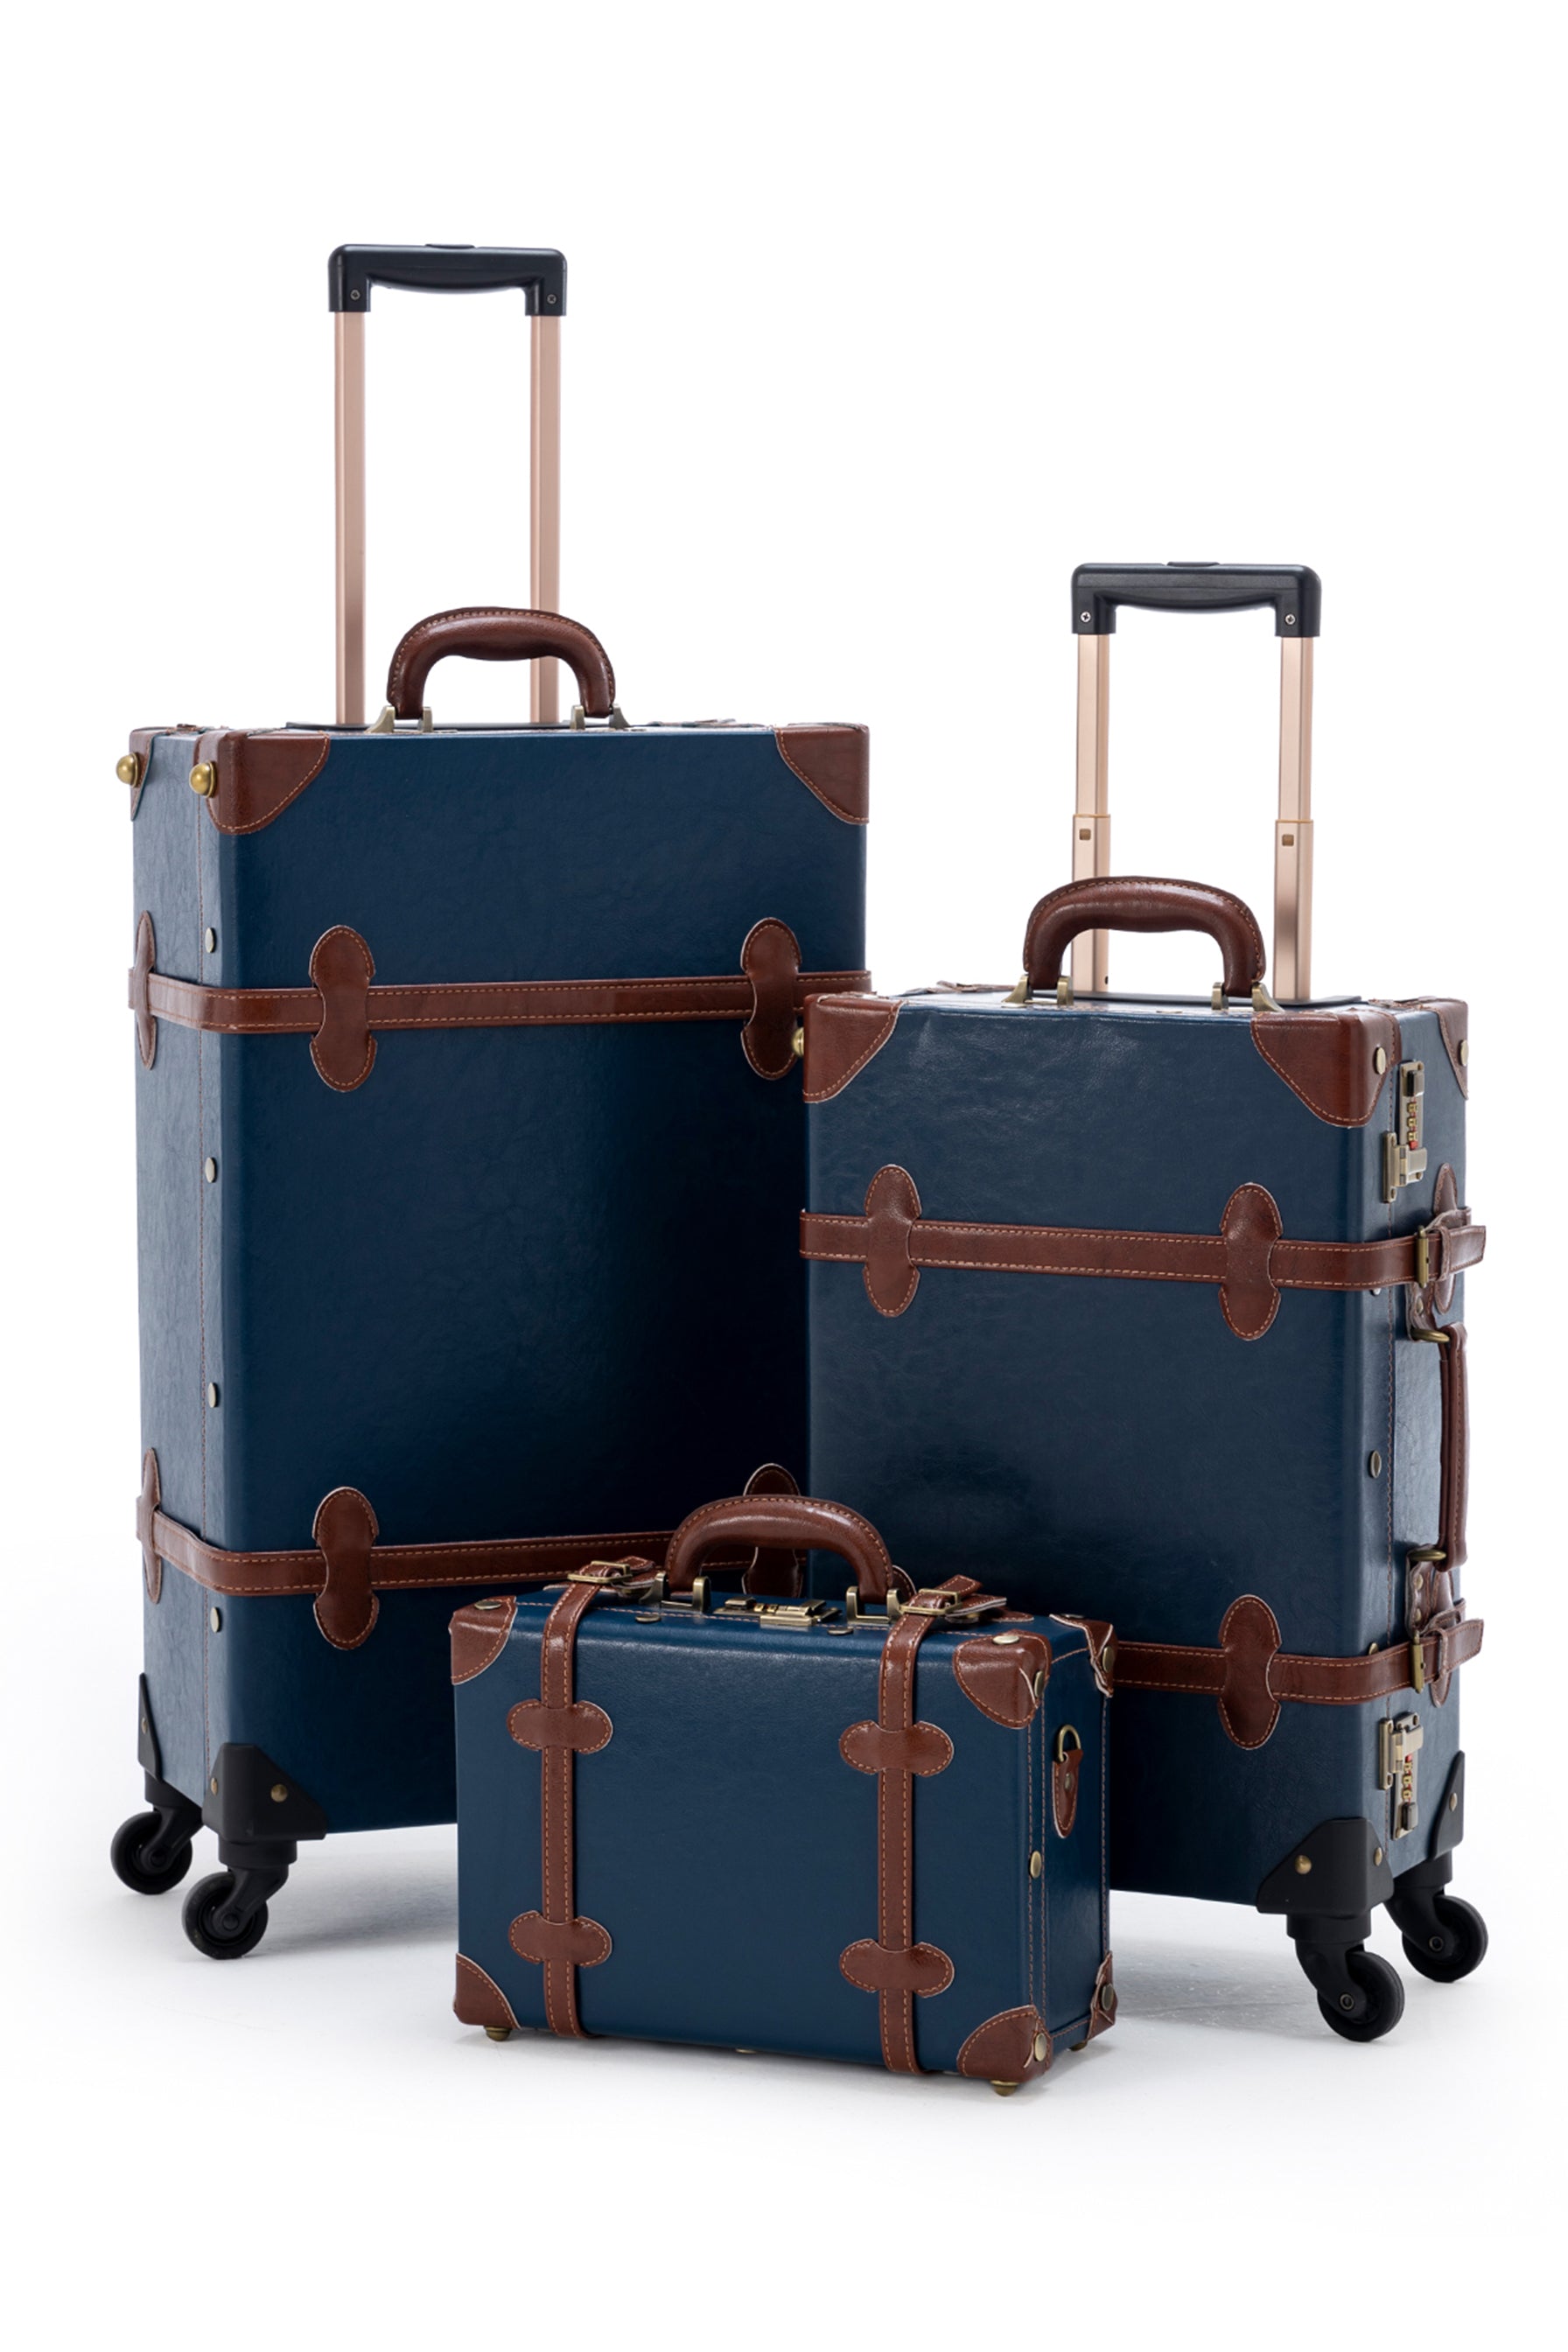 (United States) SarahFace 3 Pieces Luggage Sets - Navy Blue's